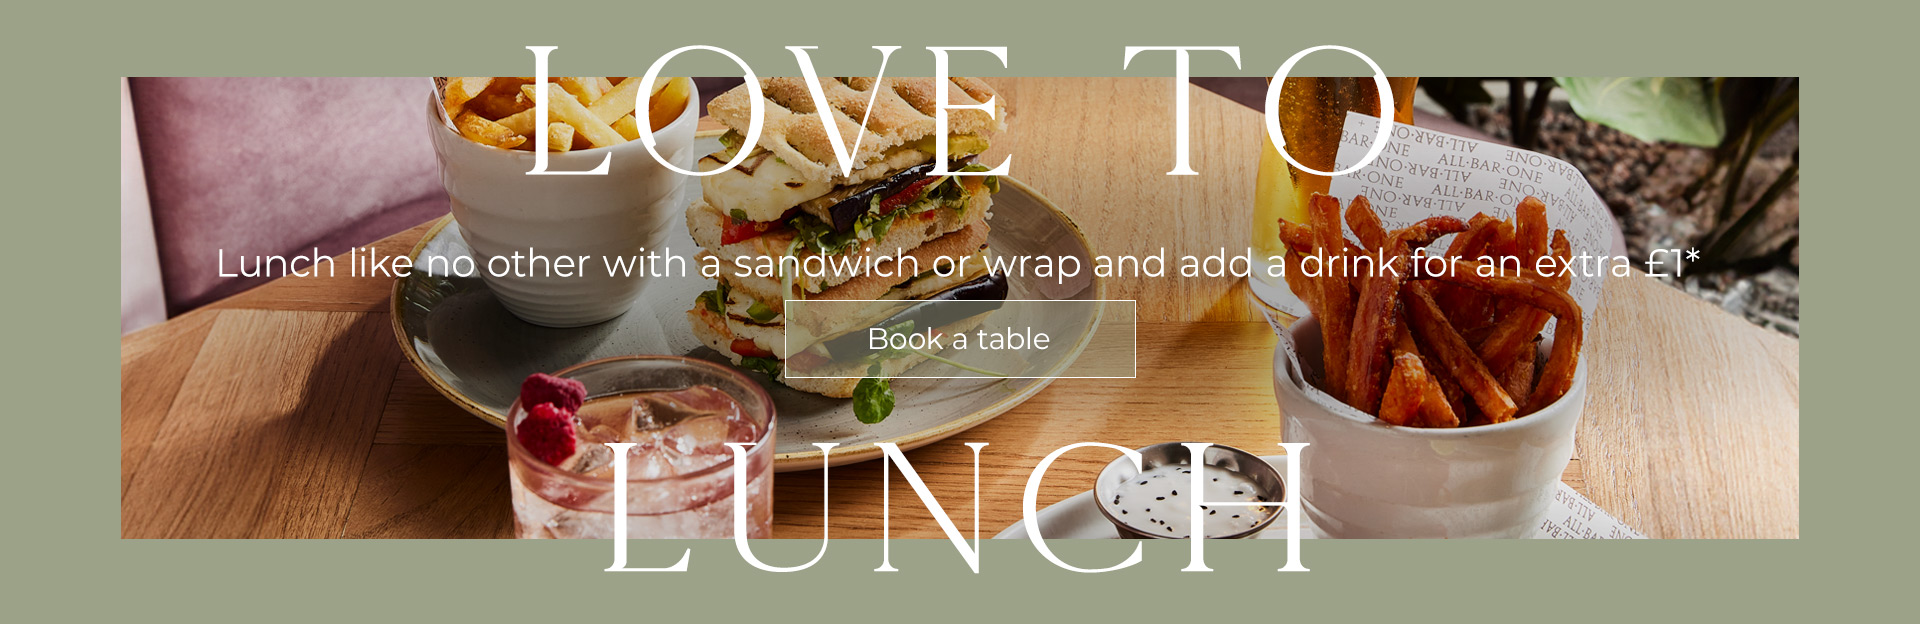 Lunch Offer at All Bar One Chester